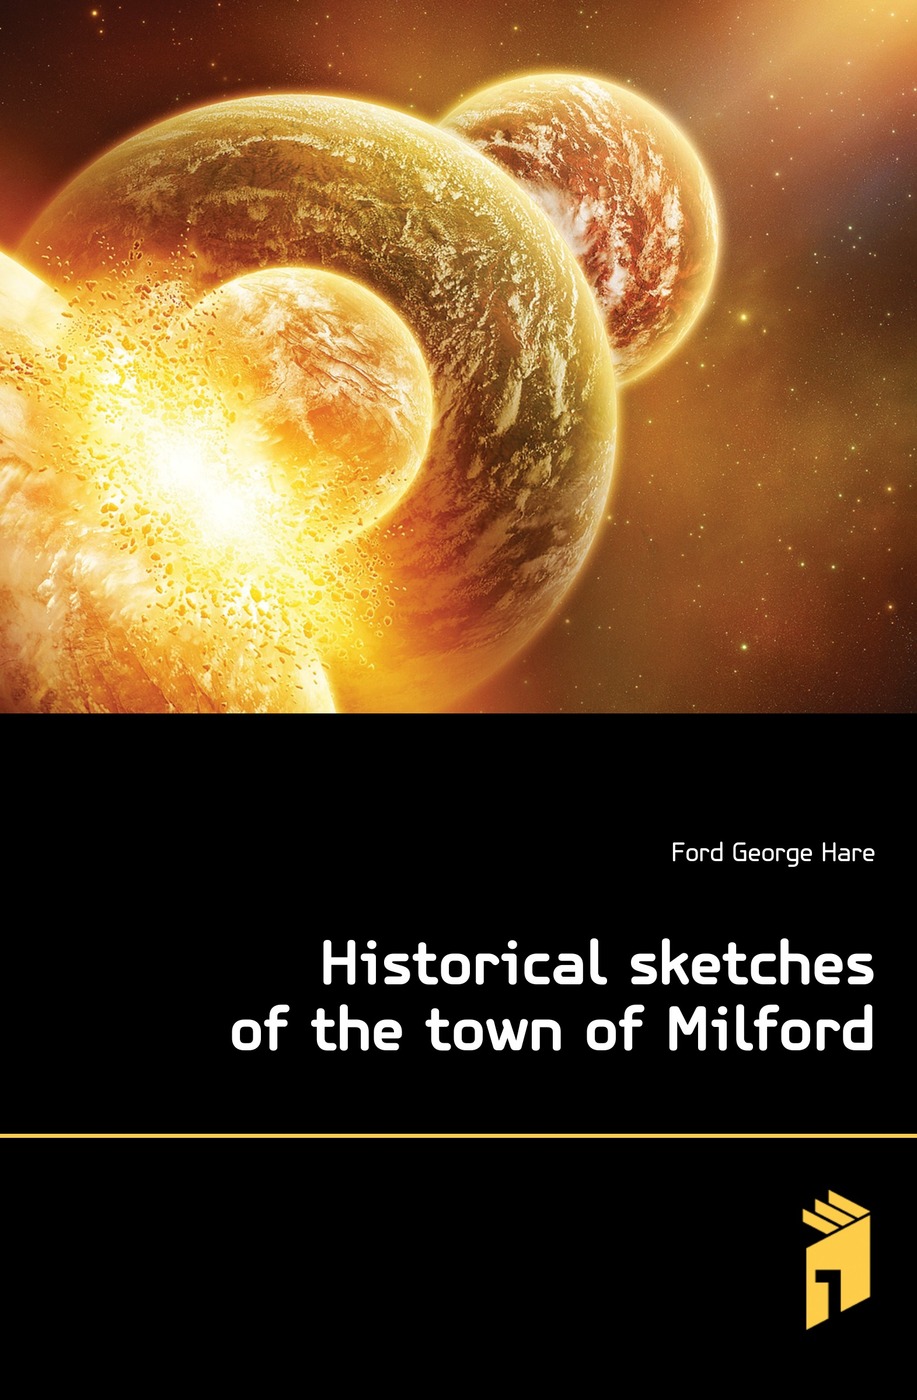 Historical sketches of the town of Milford